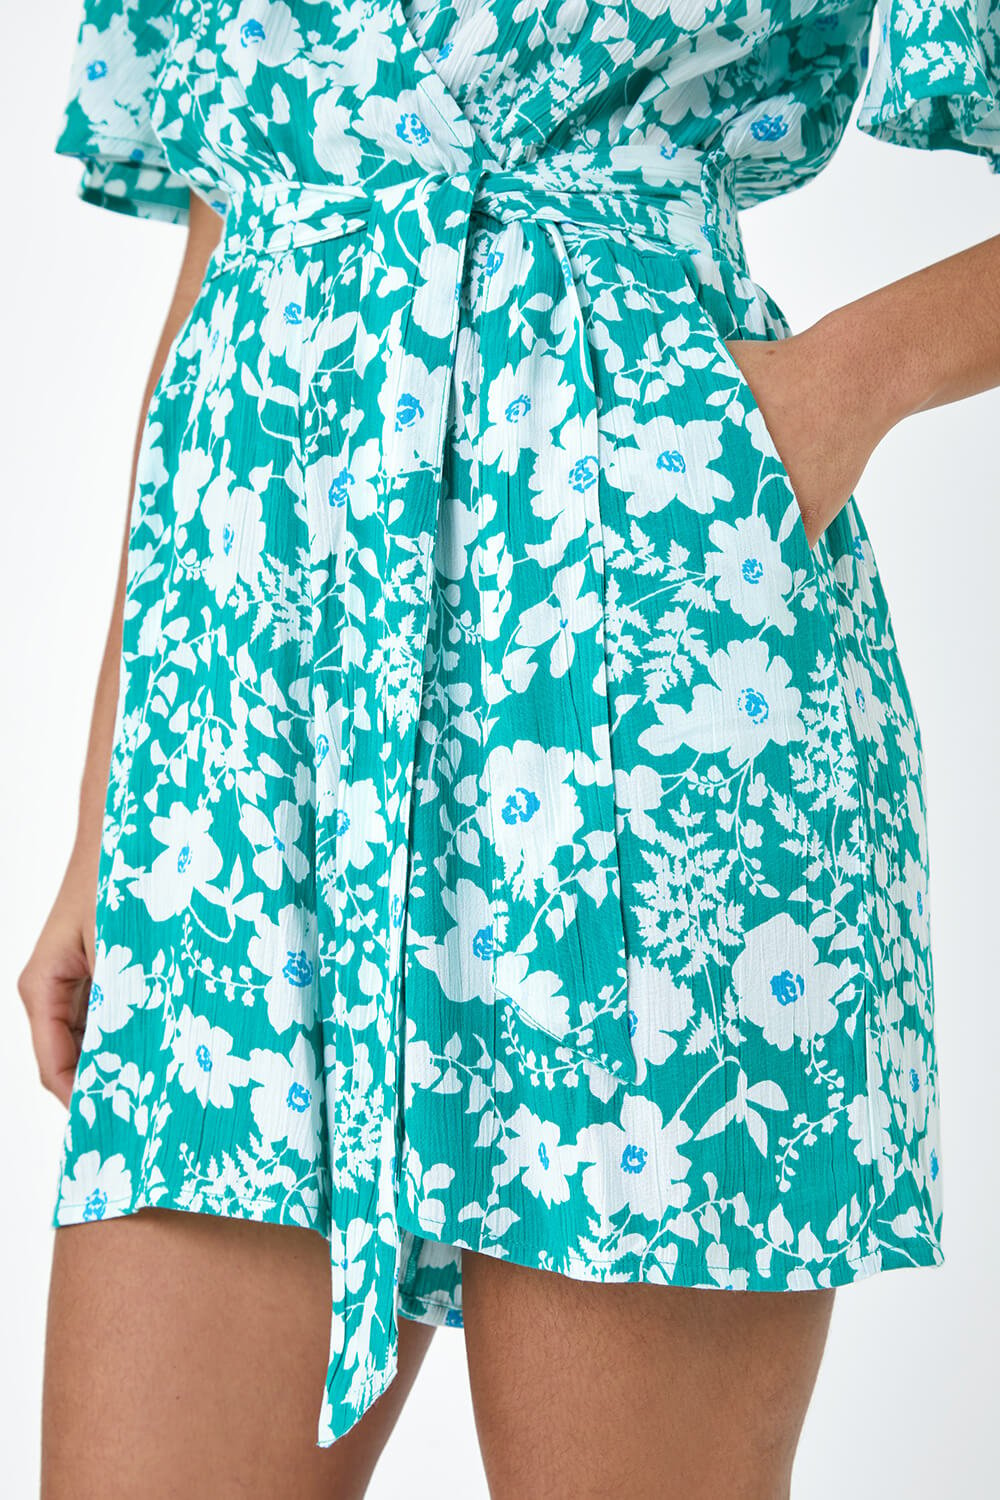 Turquoise Floral Print Belted Wrap Playsuit, Image 5 of 5